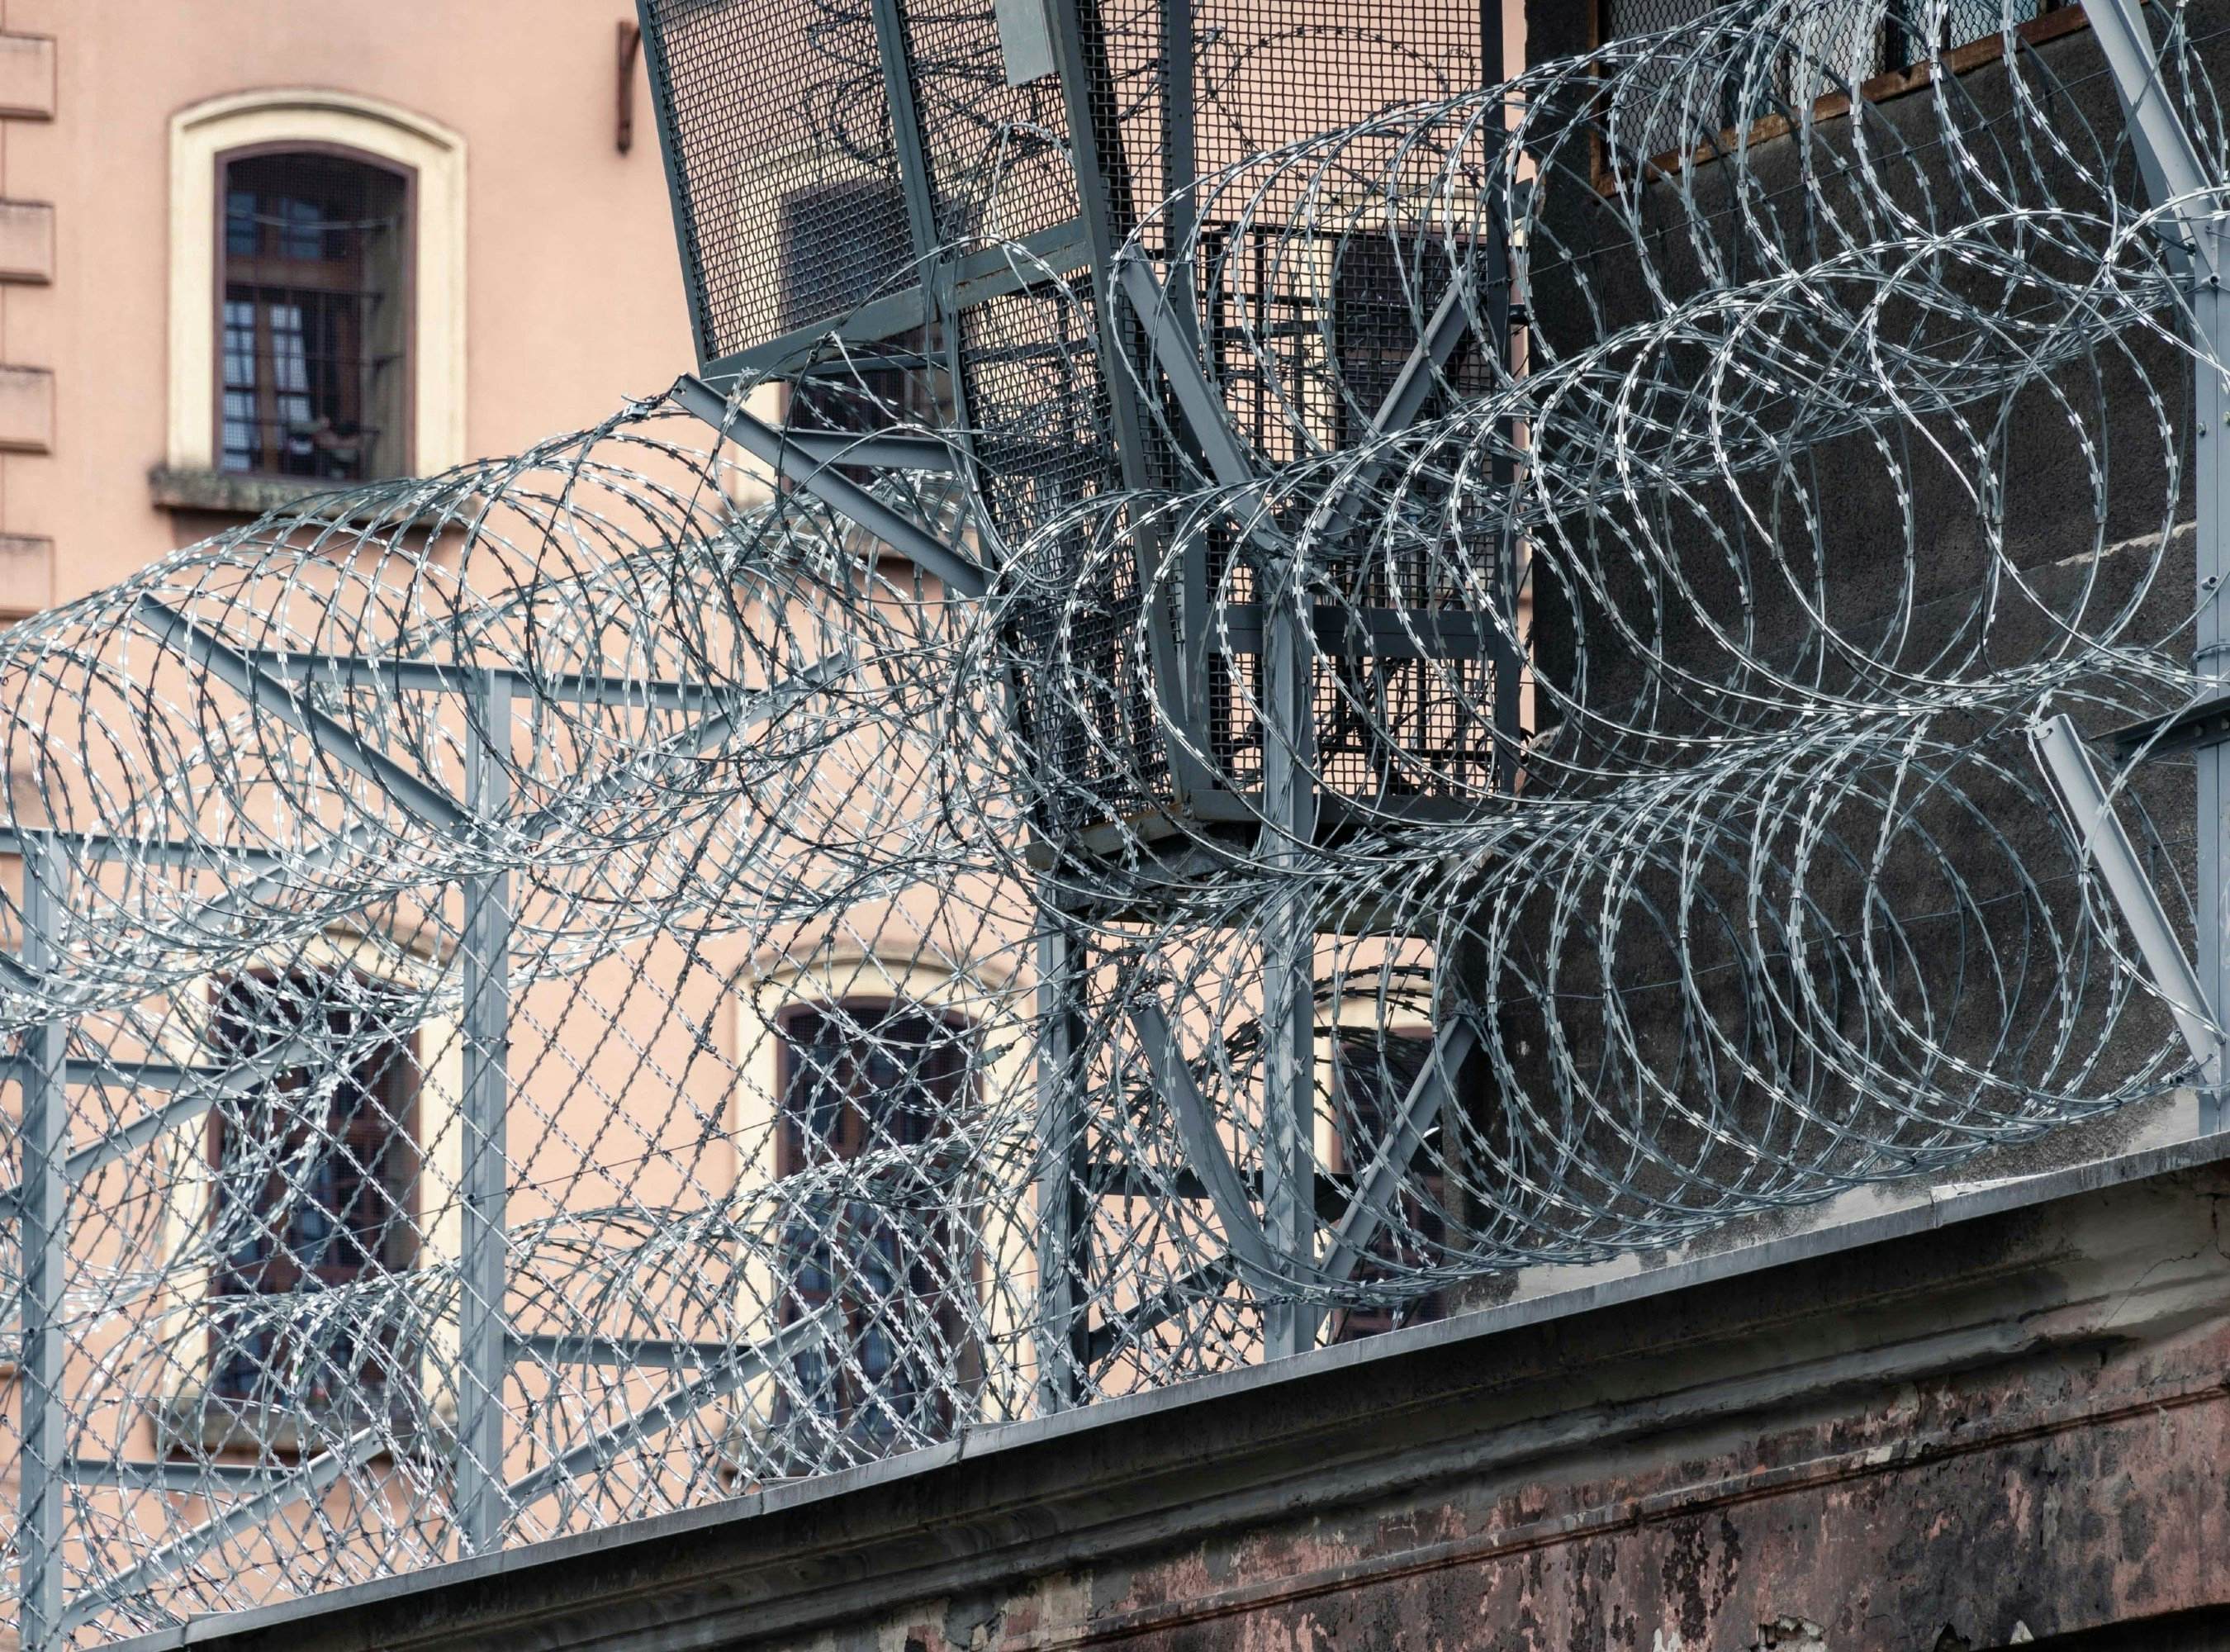 Dozens of Prisons Now Face COVID-19-Related Civil Rights Lawsuits